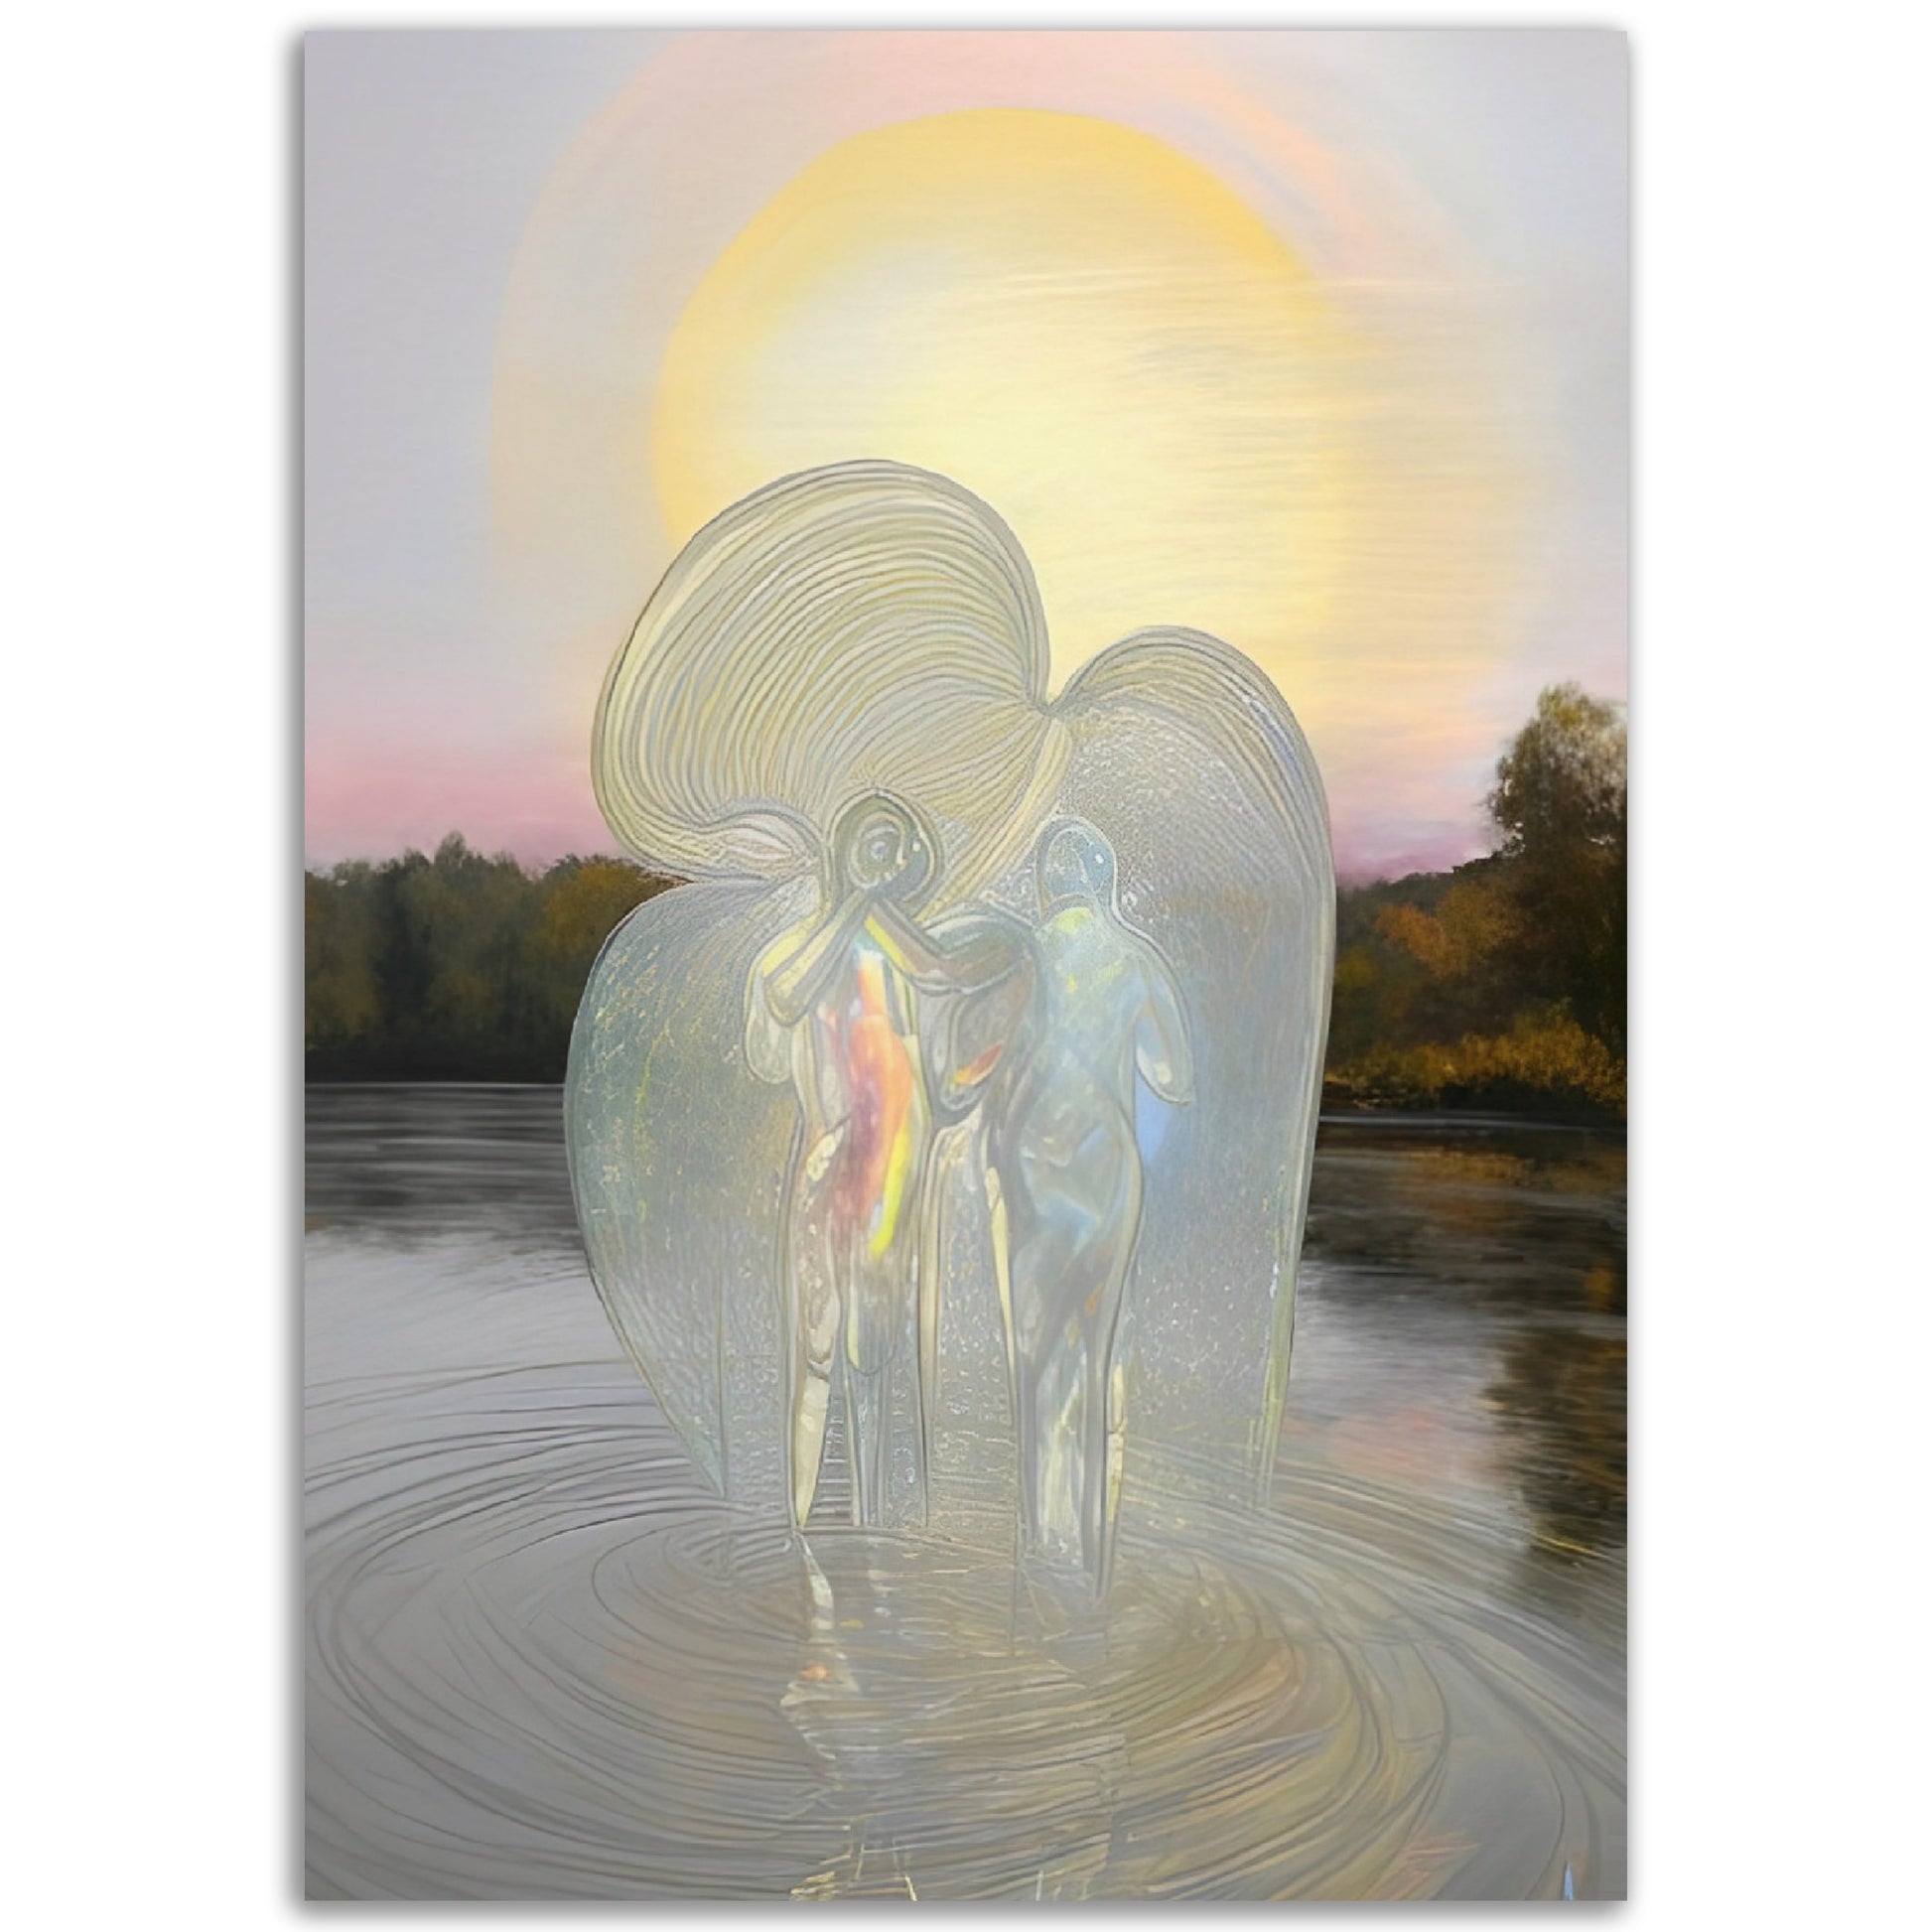 Guardian Angels - Poster by Kaja Borgen. Discover serenity and inspiration with our spiritual art prints and posters. Elevate your sacred space with unique designs on museum-quality paper. Perfect for spiritual seekers and yogis.​​